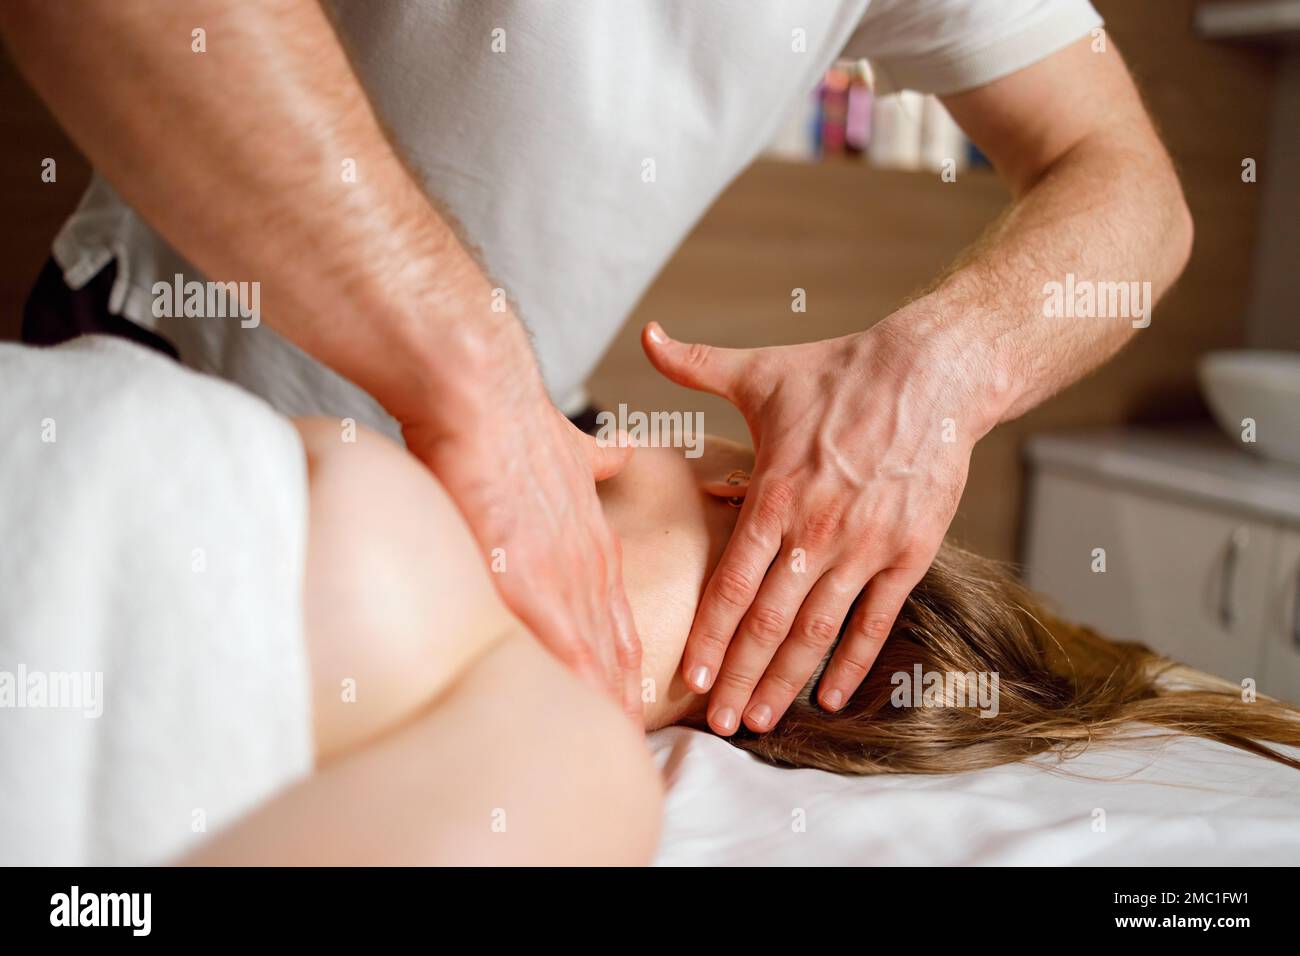 Close-up view of the masseur hands giving a neck and head massage to a young woman Stock Photo